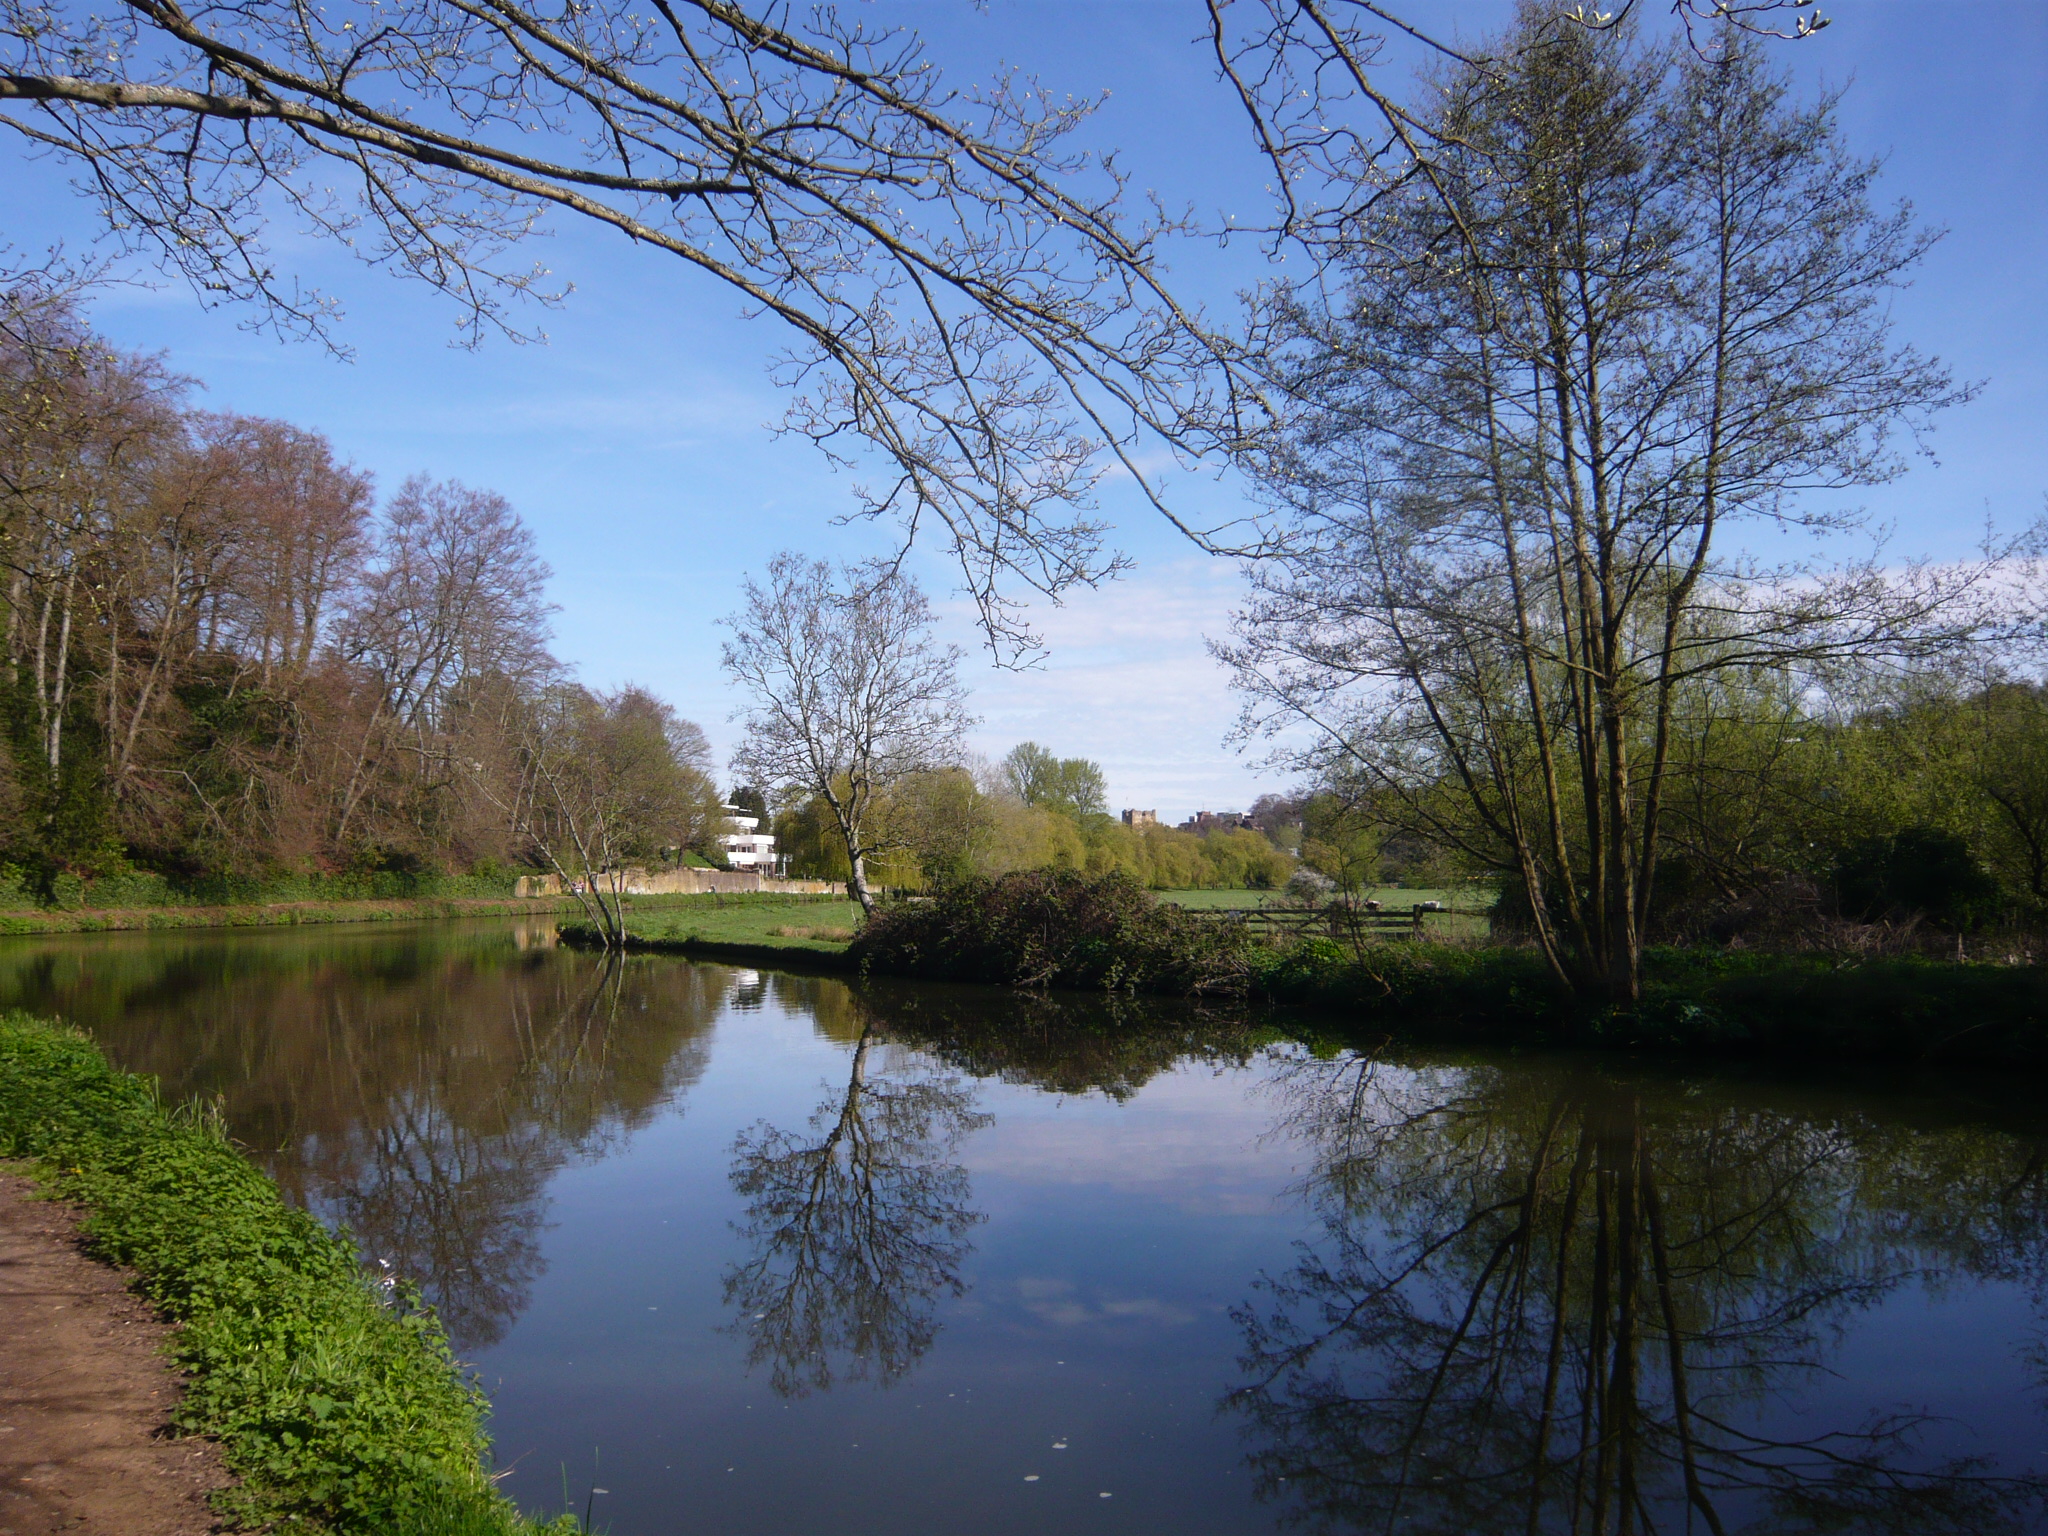 The River Wey in April looking north towards the town with the towpath on the left.